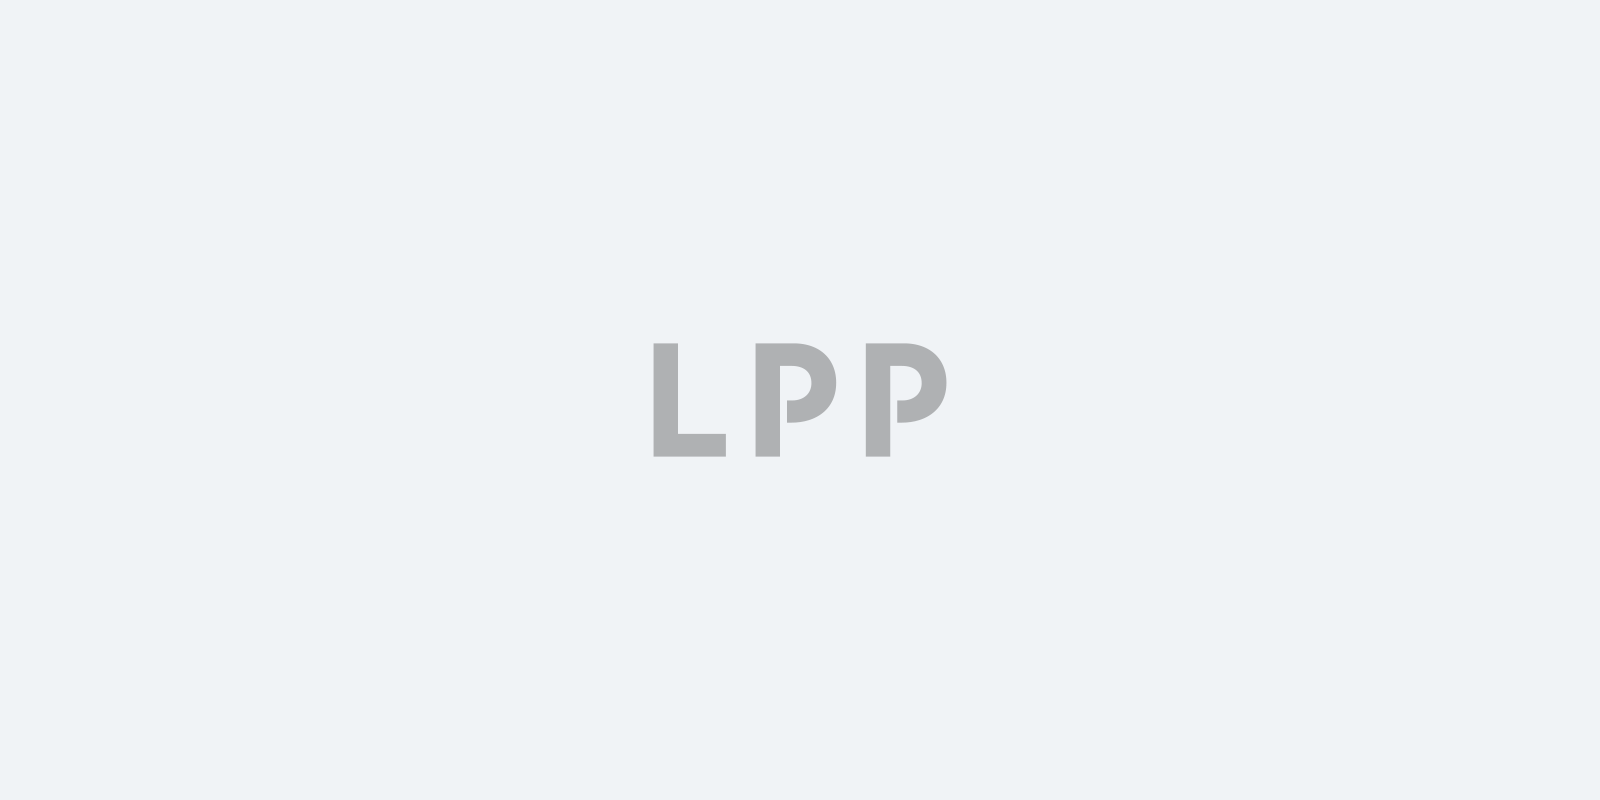 LPP integrated report for 2018